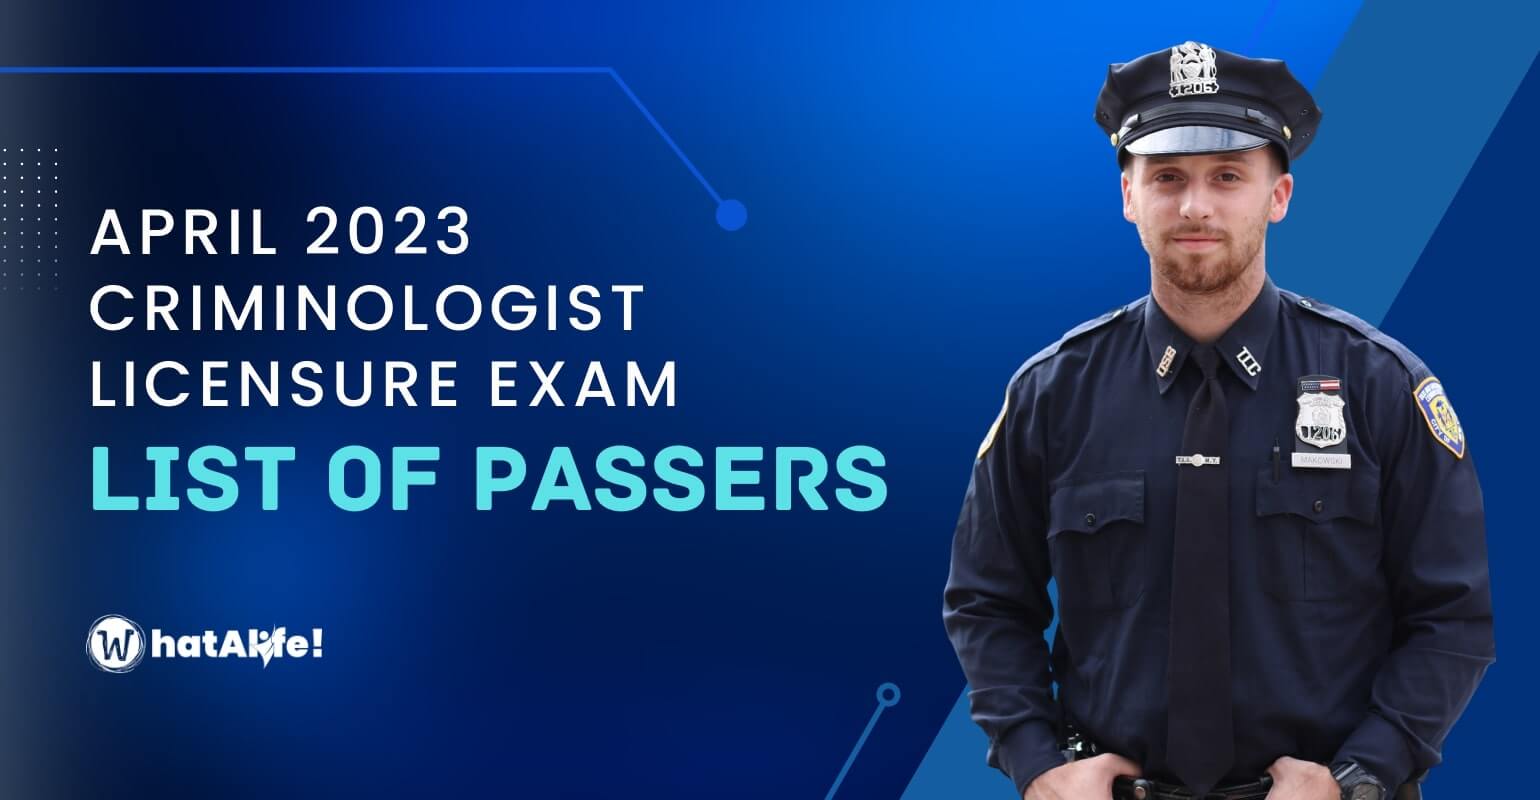 Full List of Passers — April 2023 Criminologists Licensure Exam (CLE)